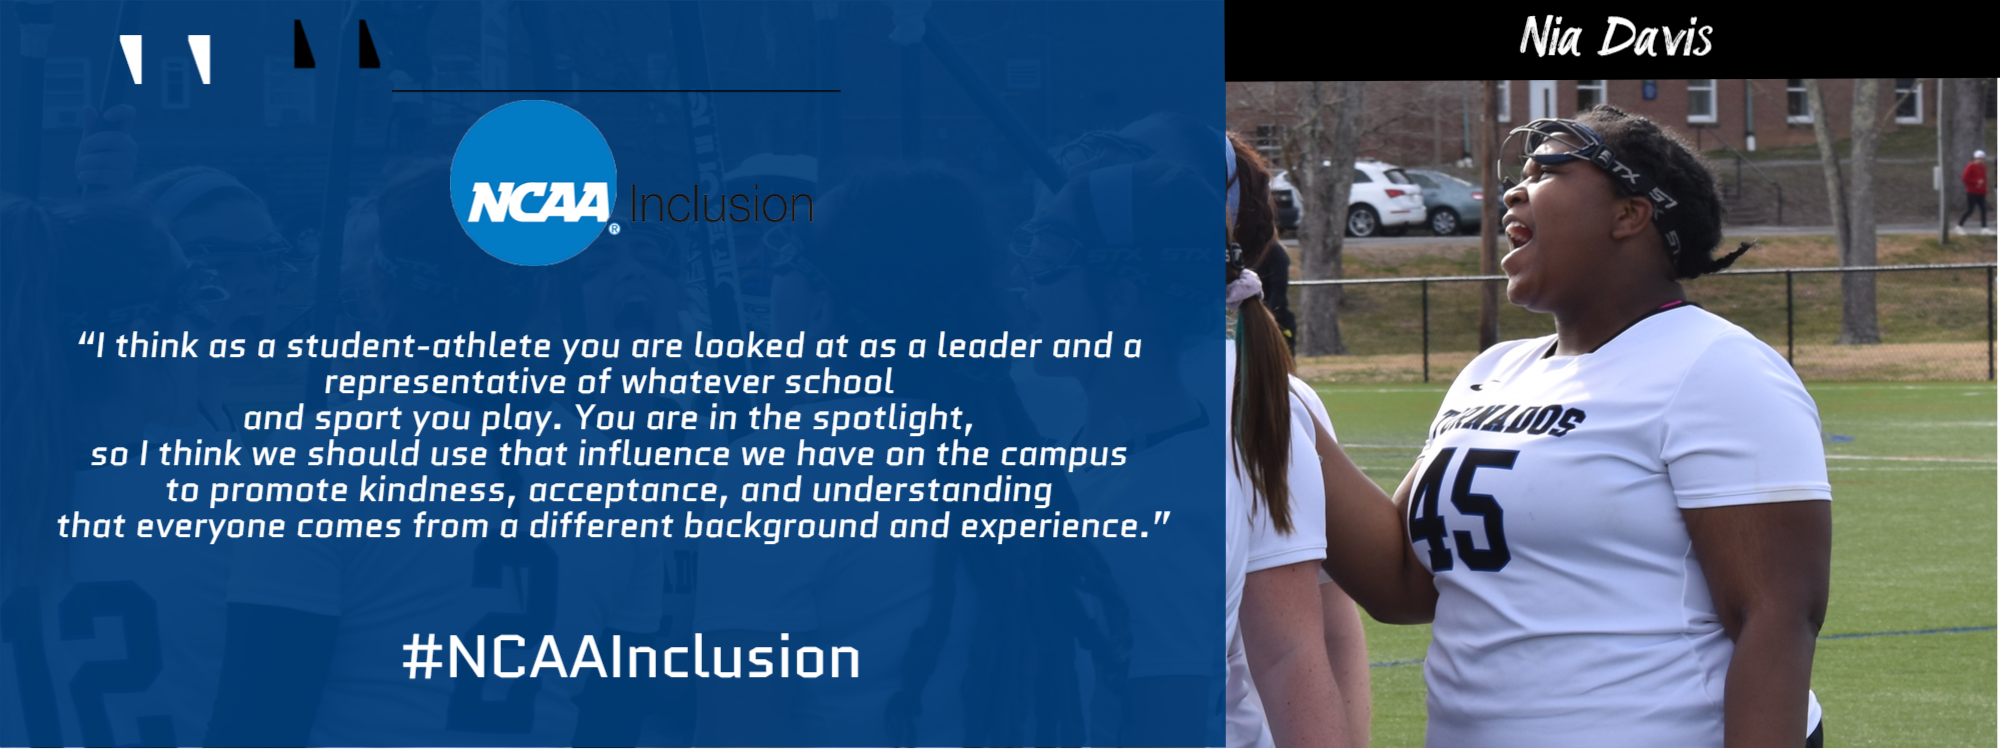 #NCAAInclusion Day 4: “Taking Action” - Featuring Women’s Lacrosse’s Nia Davis